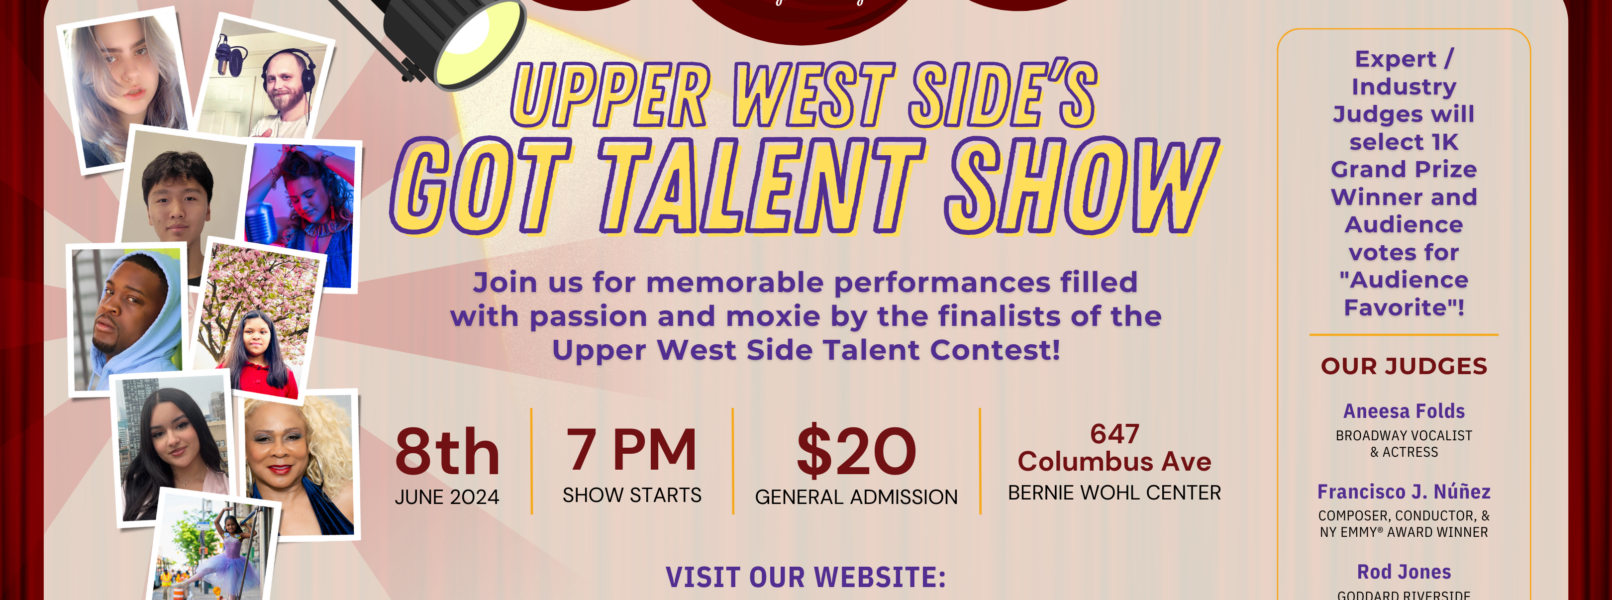 Upper West side’s Got Talent Show. Join us for memorable performances filled with passion and moxie by the finalists of the Upper West Side Talent Contest! June 8th at 7pm. Tickets for $20.